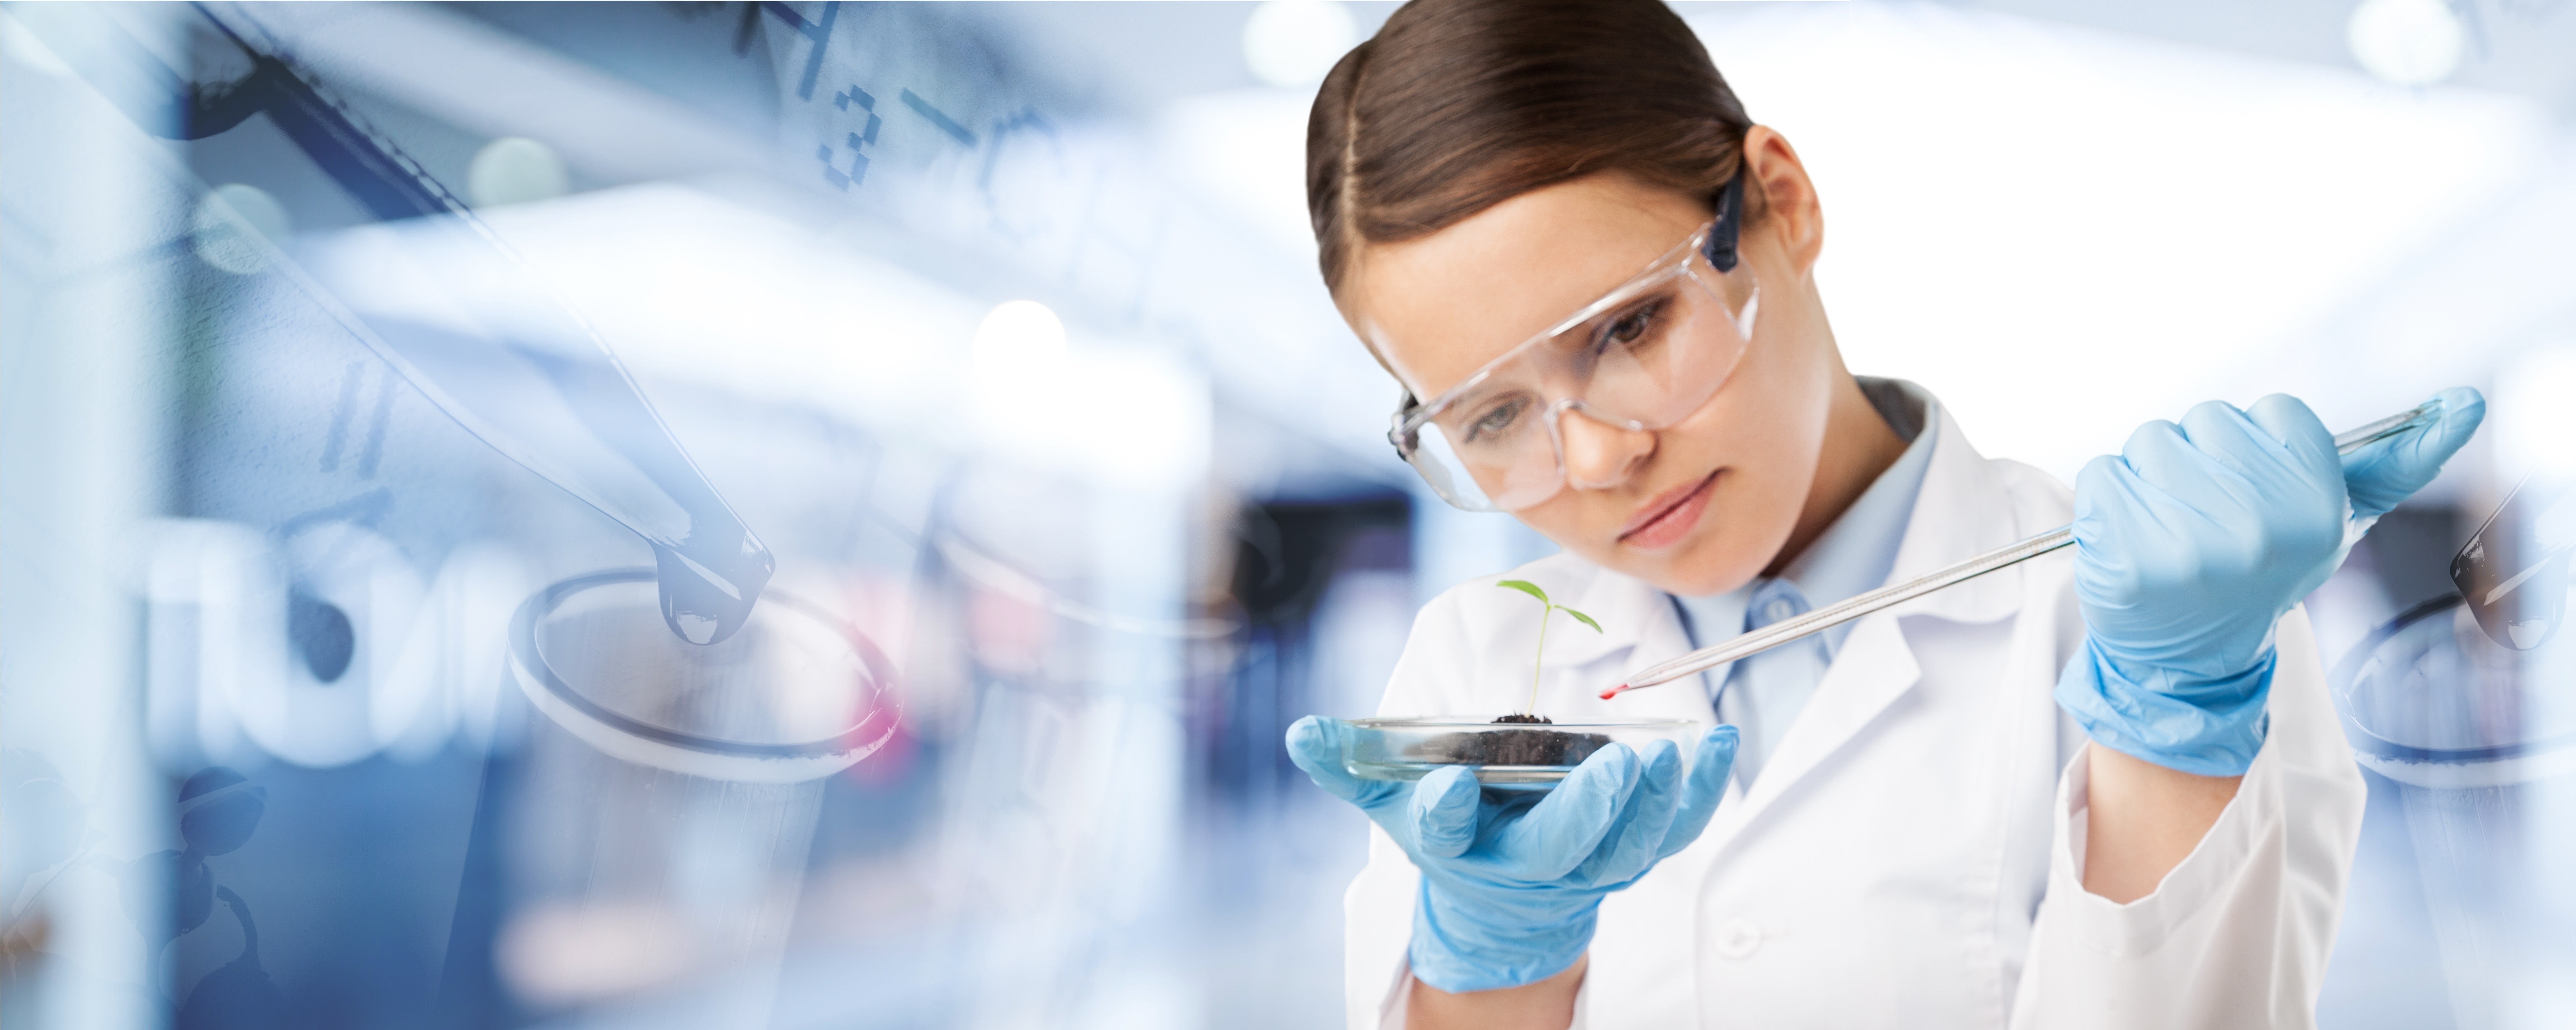 Image of woman in a lab doing testing